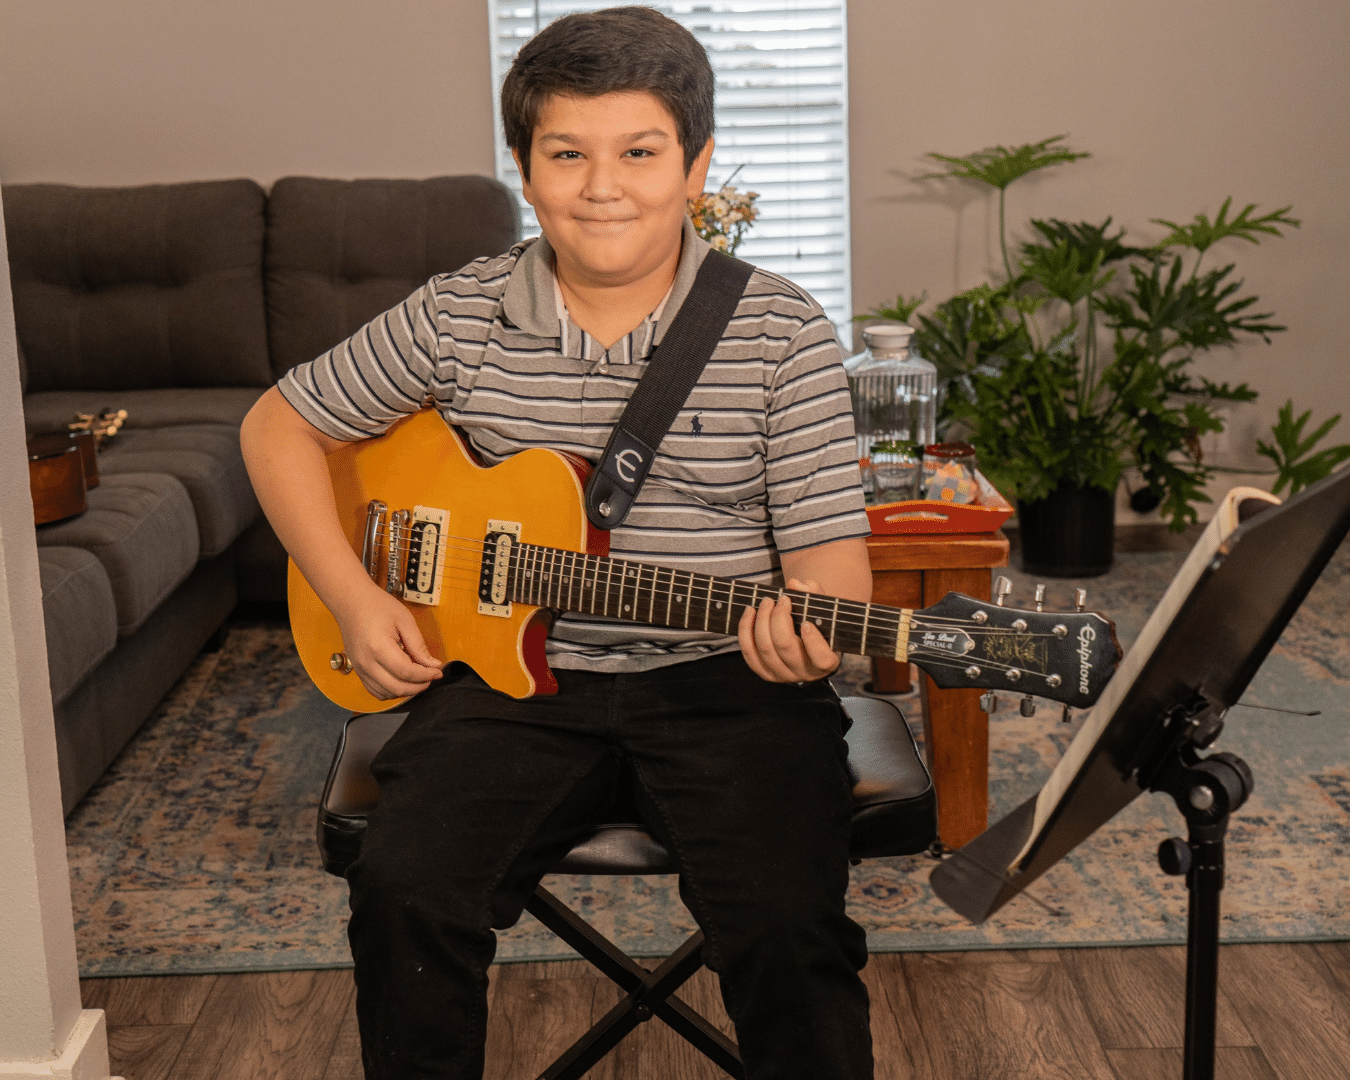 Smiling boy hold an electric guitar. Happy guitar student.